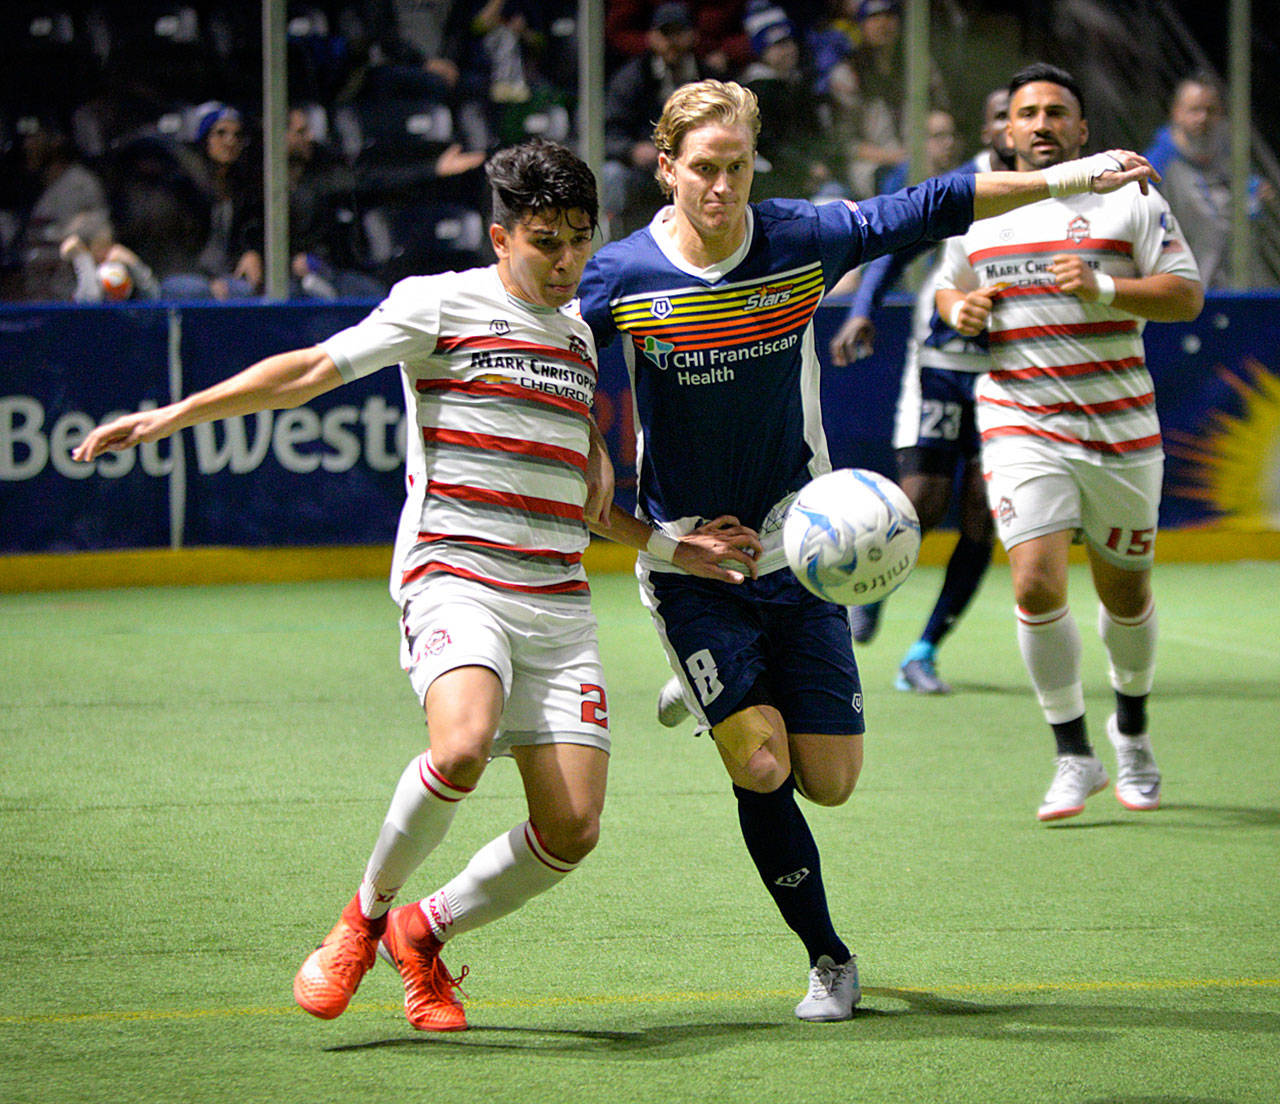 The Stars’ Philip Lund, right, in action. COURTESY PHOTO, Tacoma Stars